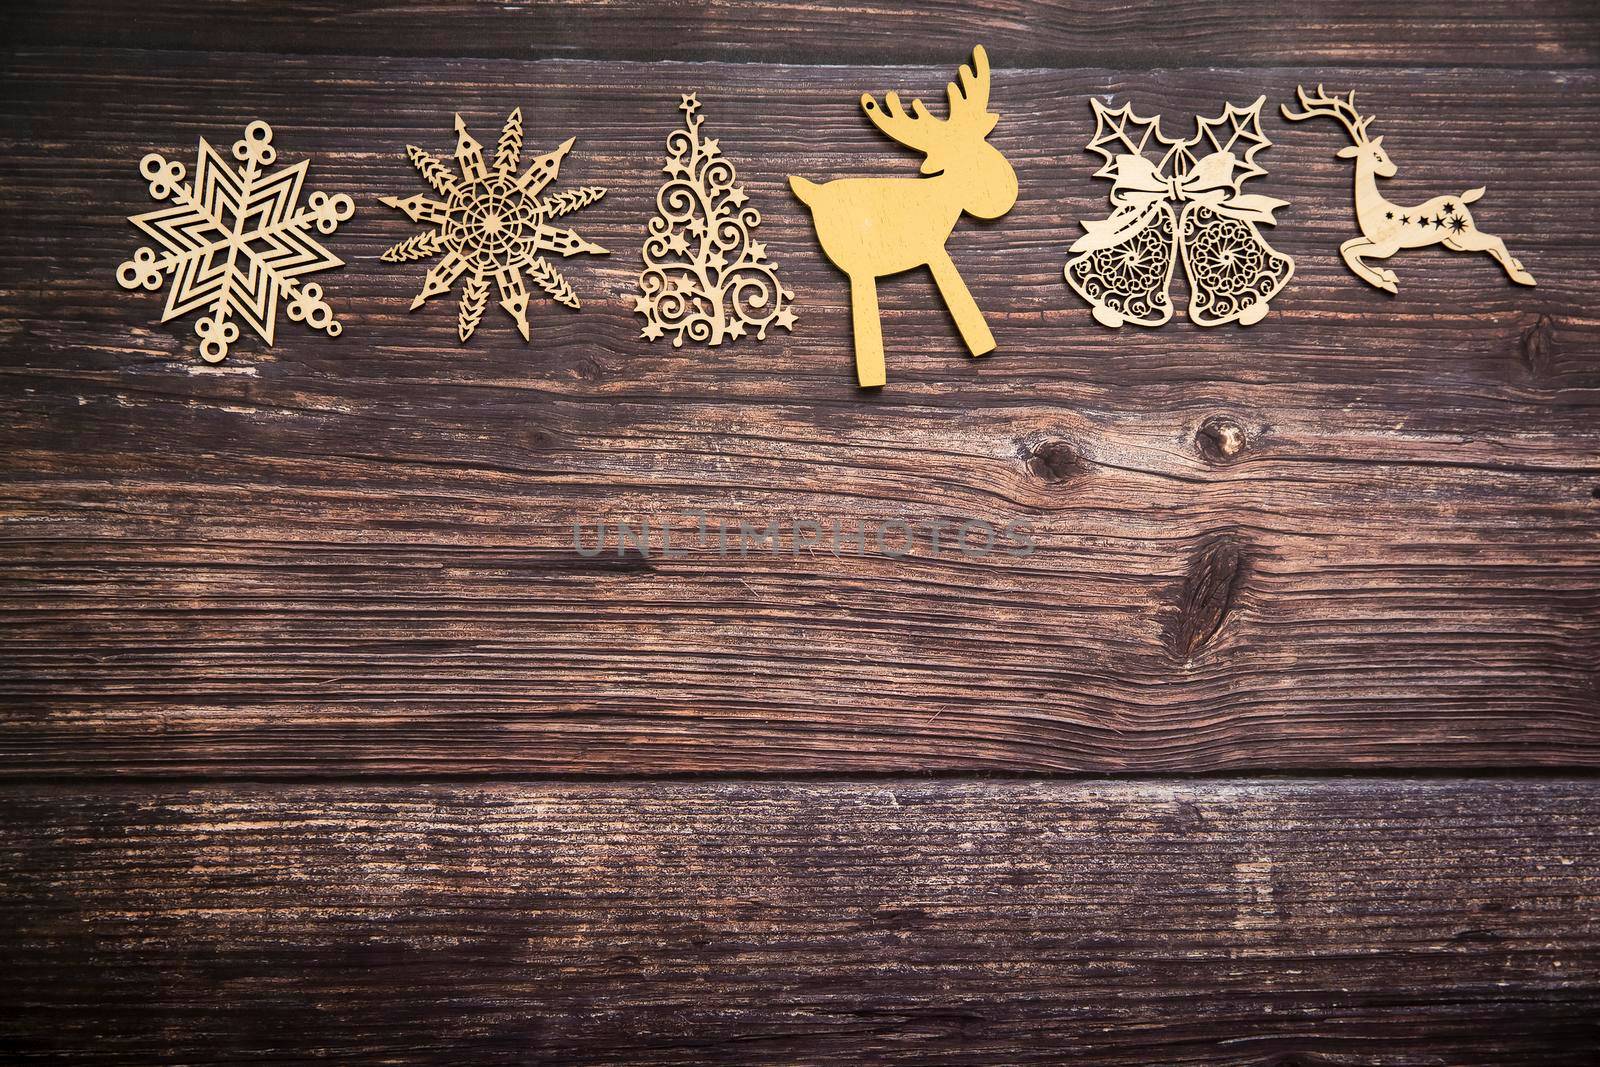 Wooden handmade snowflake toys on dark wooden Christmas background. Crafts cut from eco friendly wood material. Ecological home decor for winter holiday. Copy space. Frame by elenarostunova